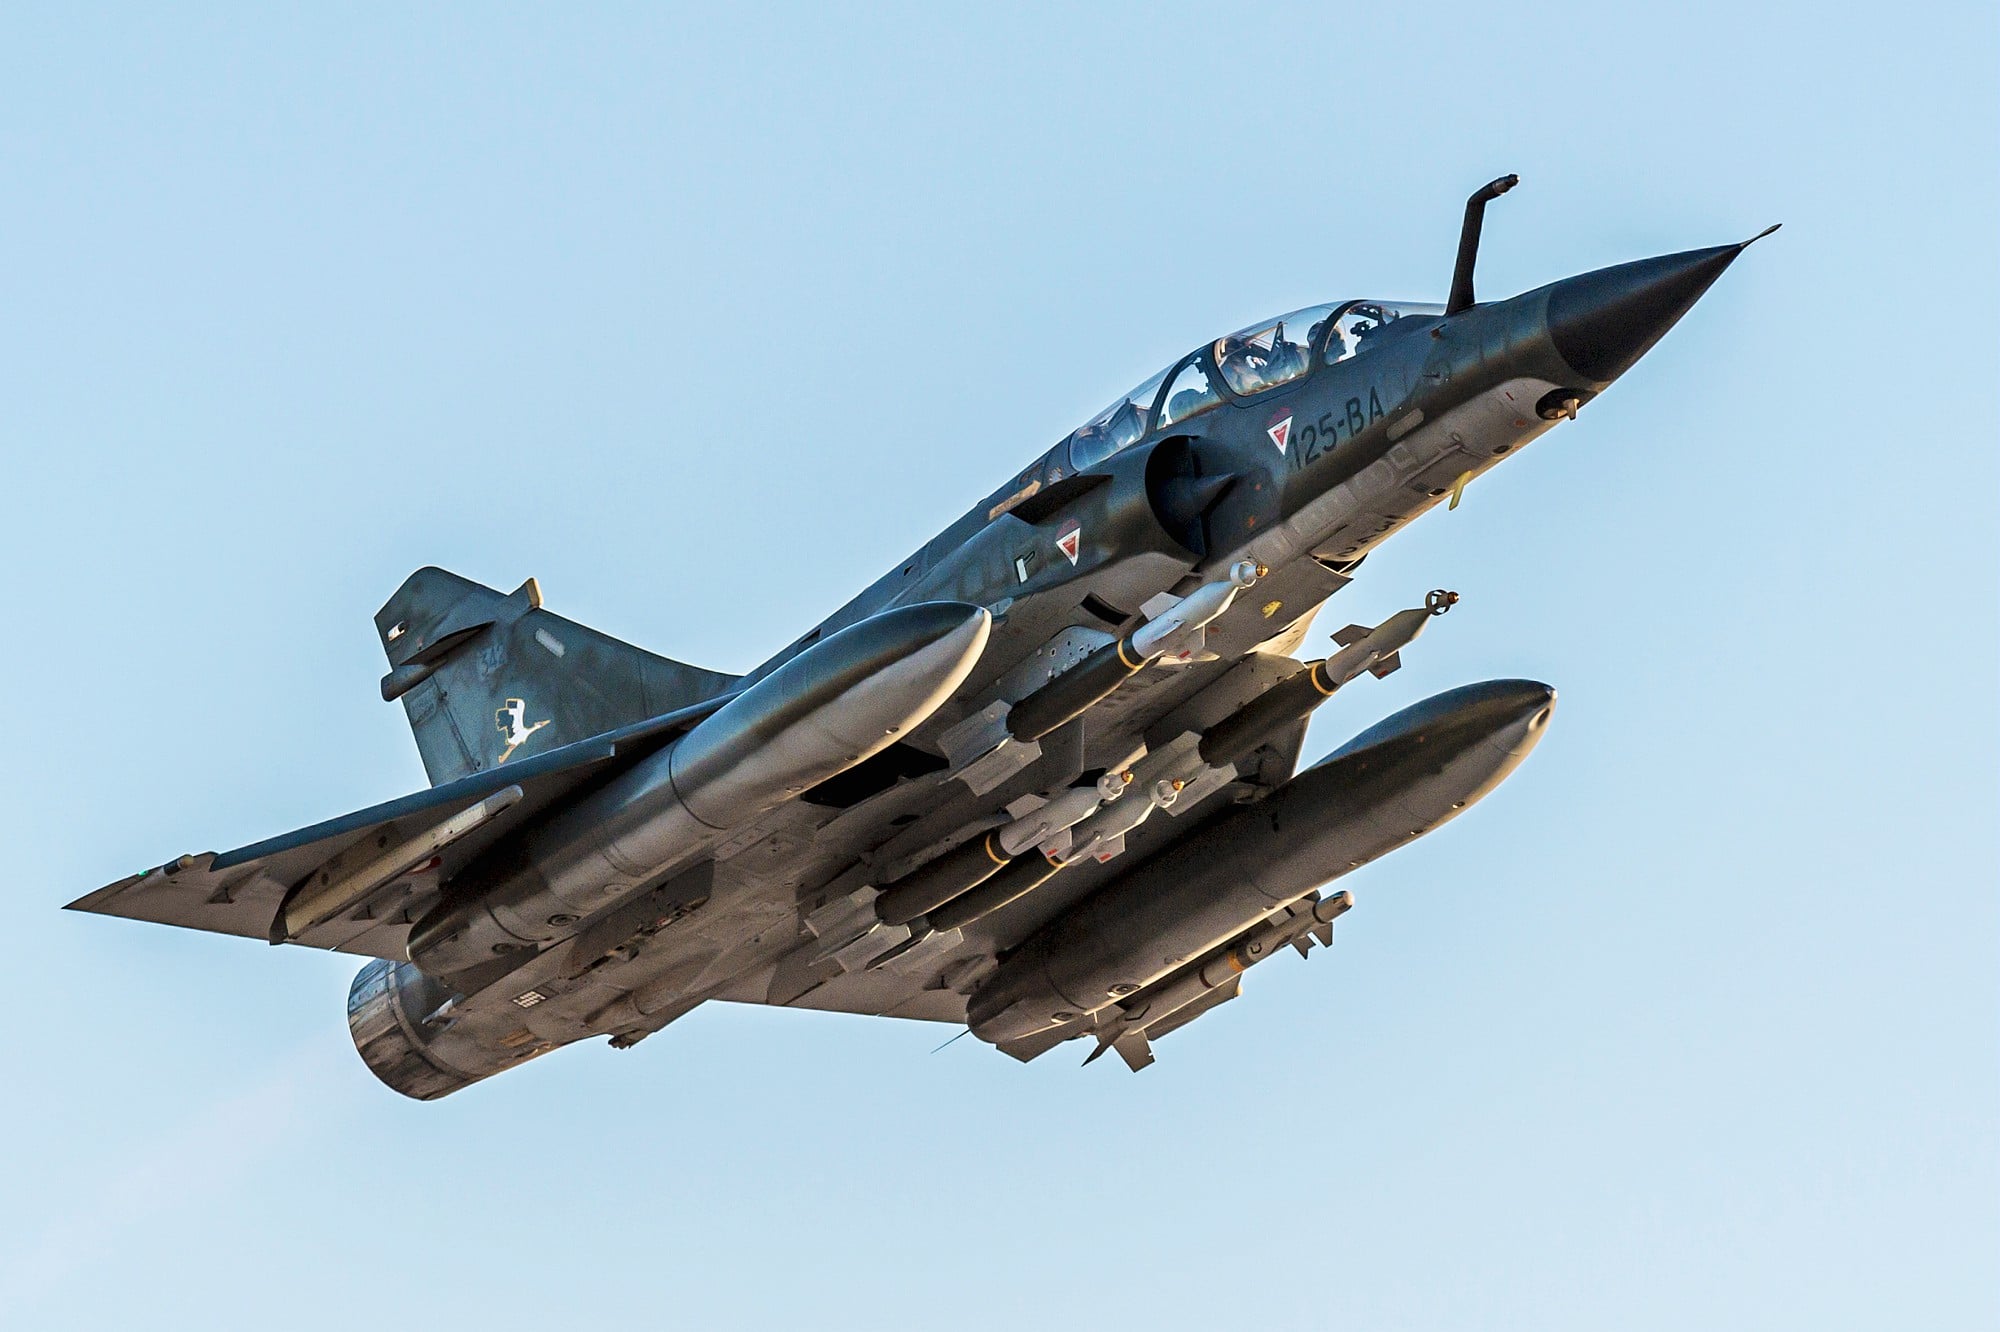 Goodbye from the Mirage 2000N - Passion News